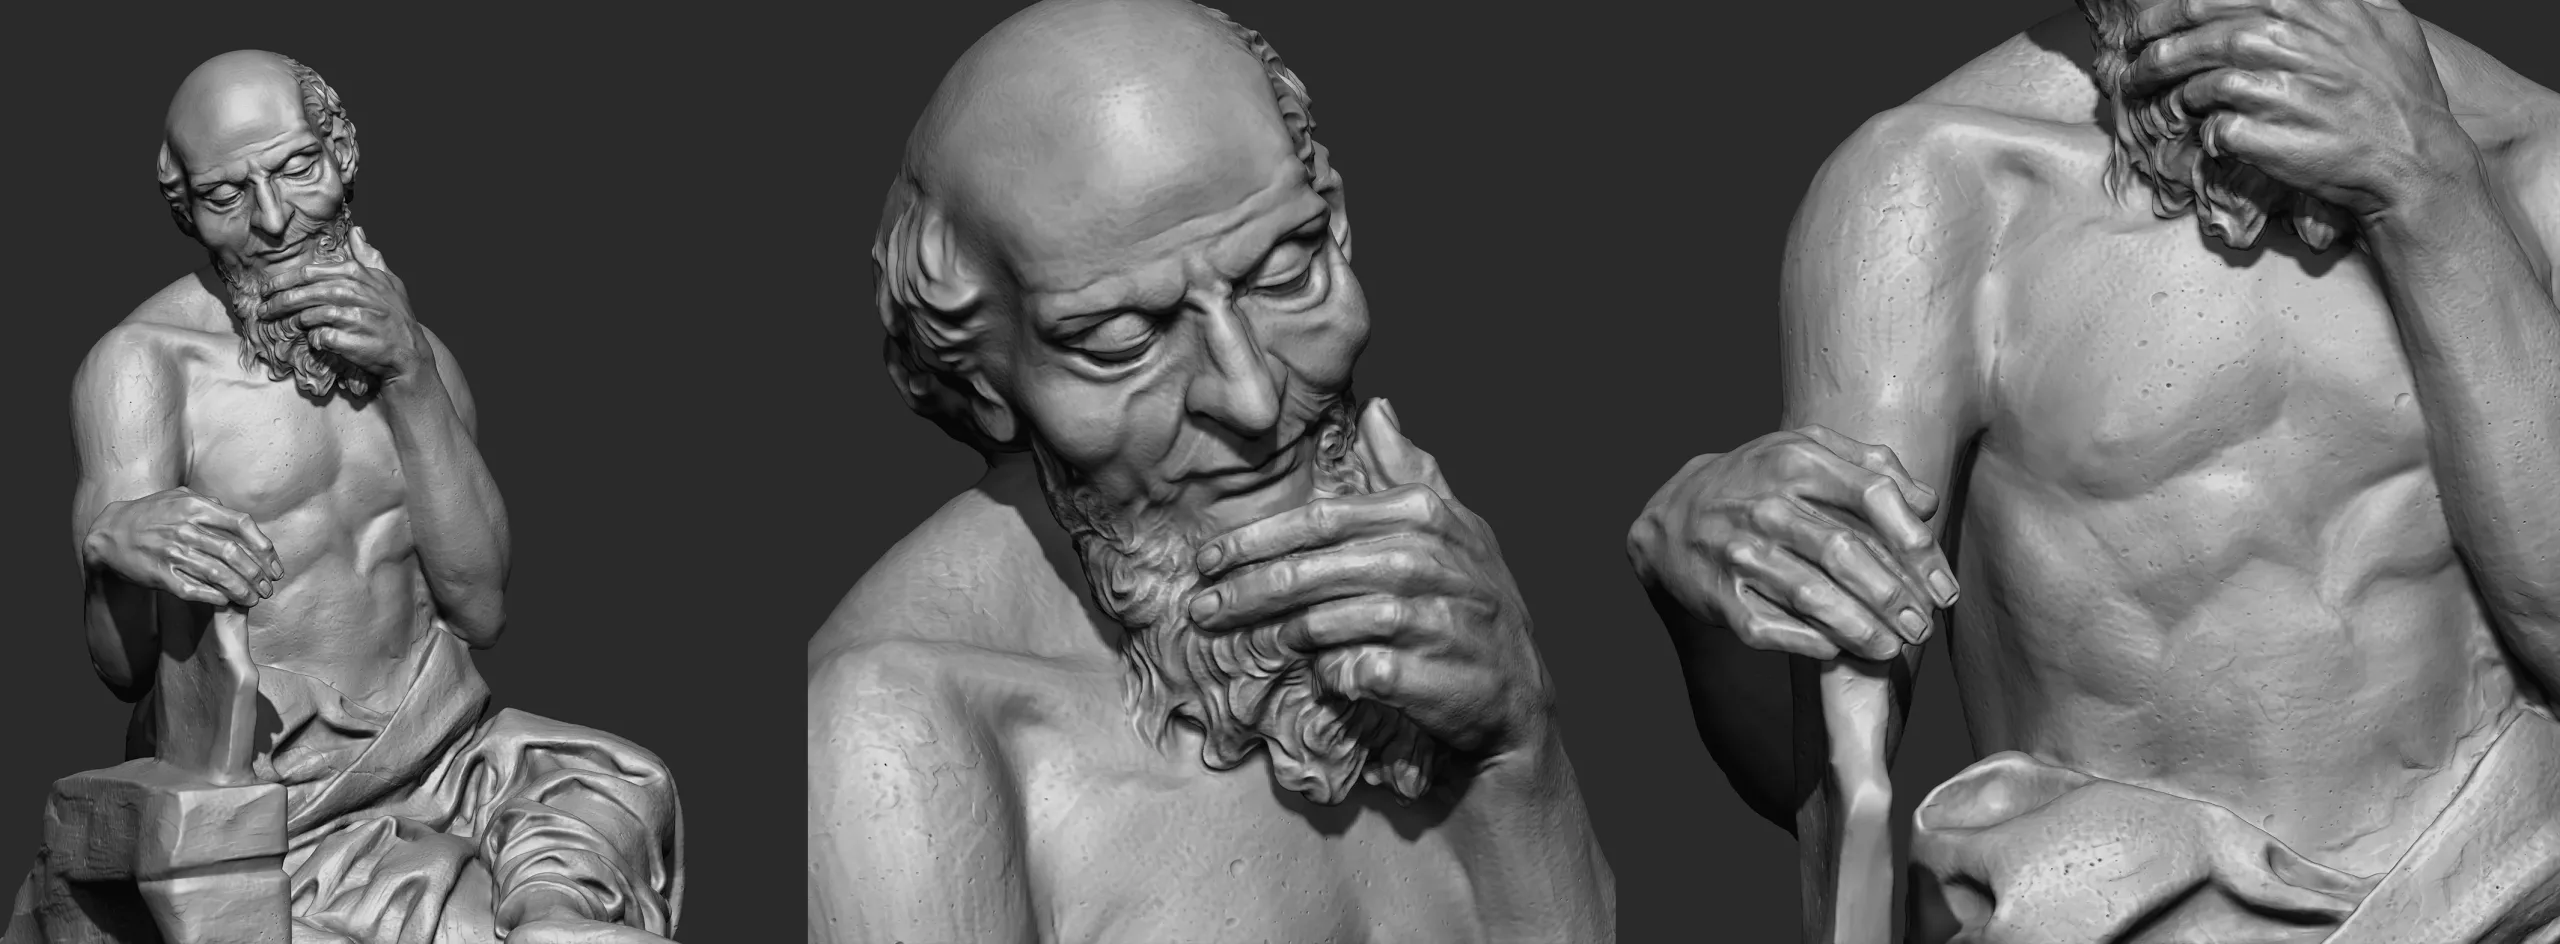 3 in One Character Sculpture Zbrush 2019 HighPoly